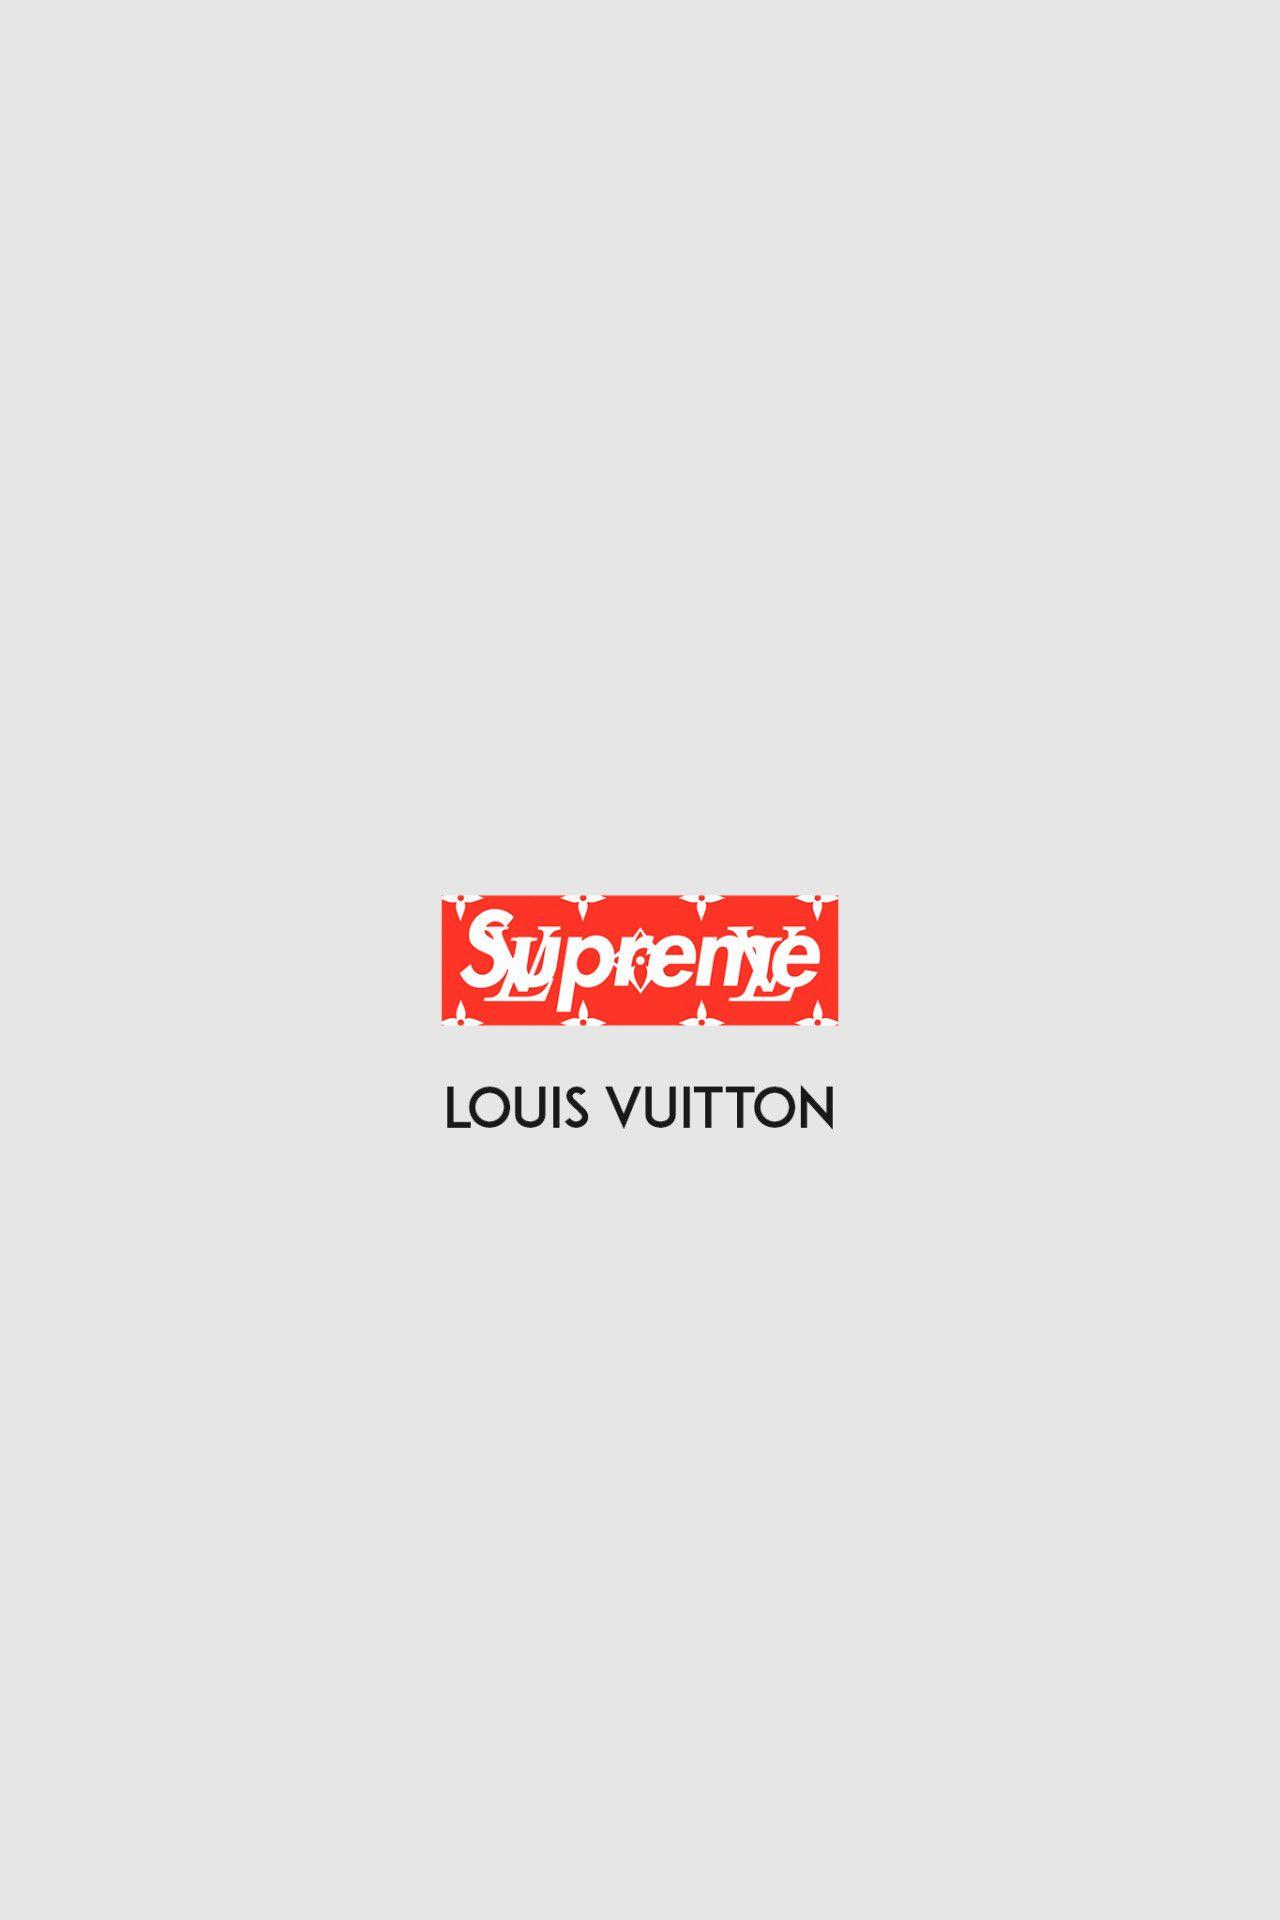 Supreme Iphone Wallpapers Top Free Supreme Iphone Backgrounds Wallpaperaccess